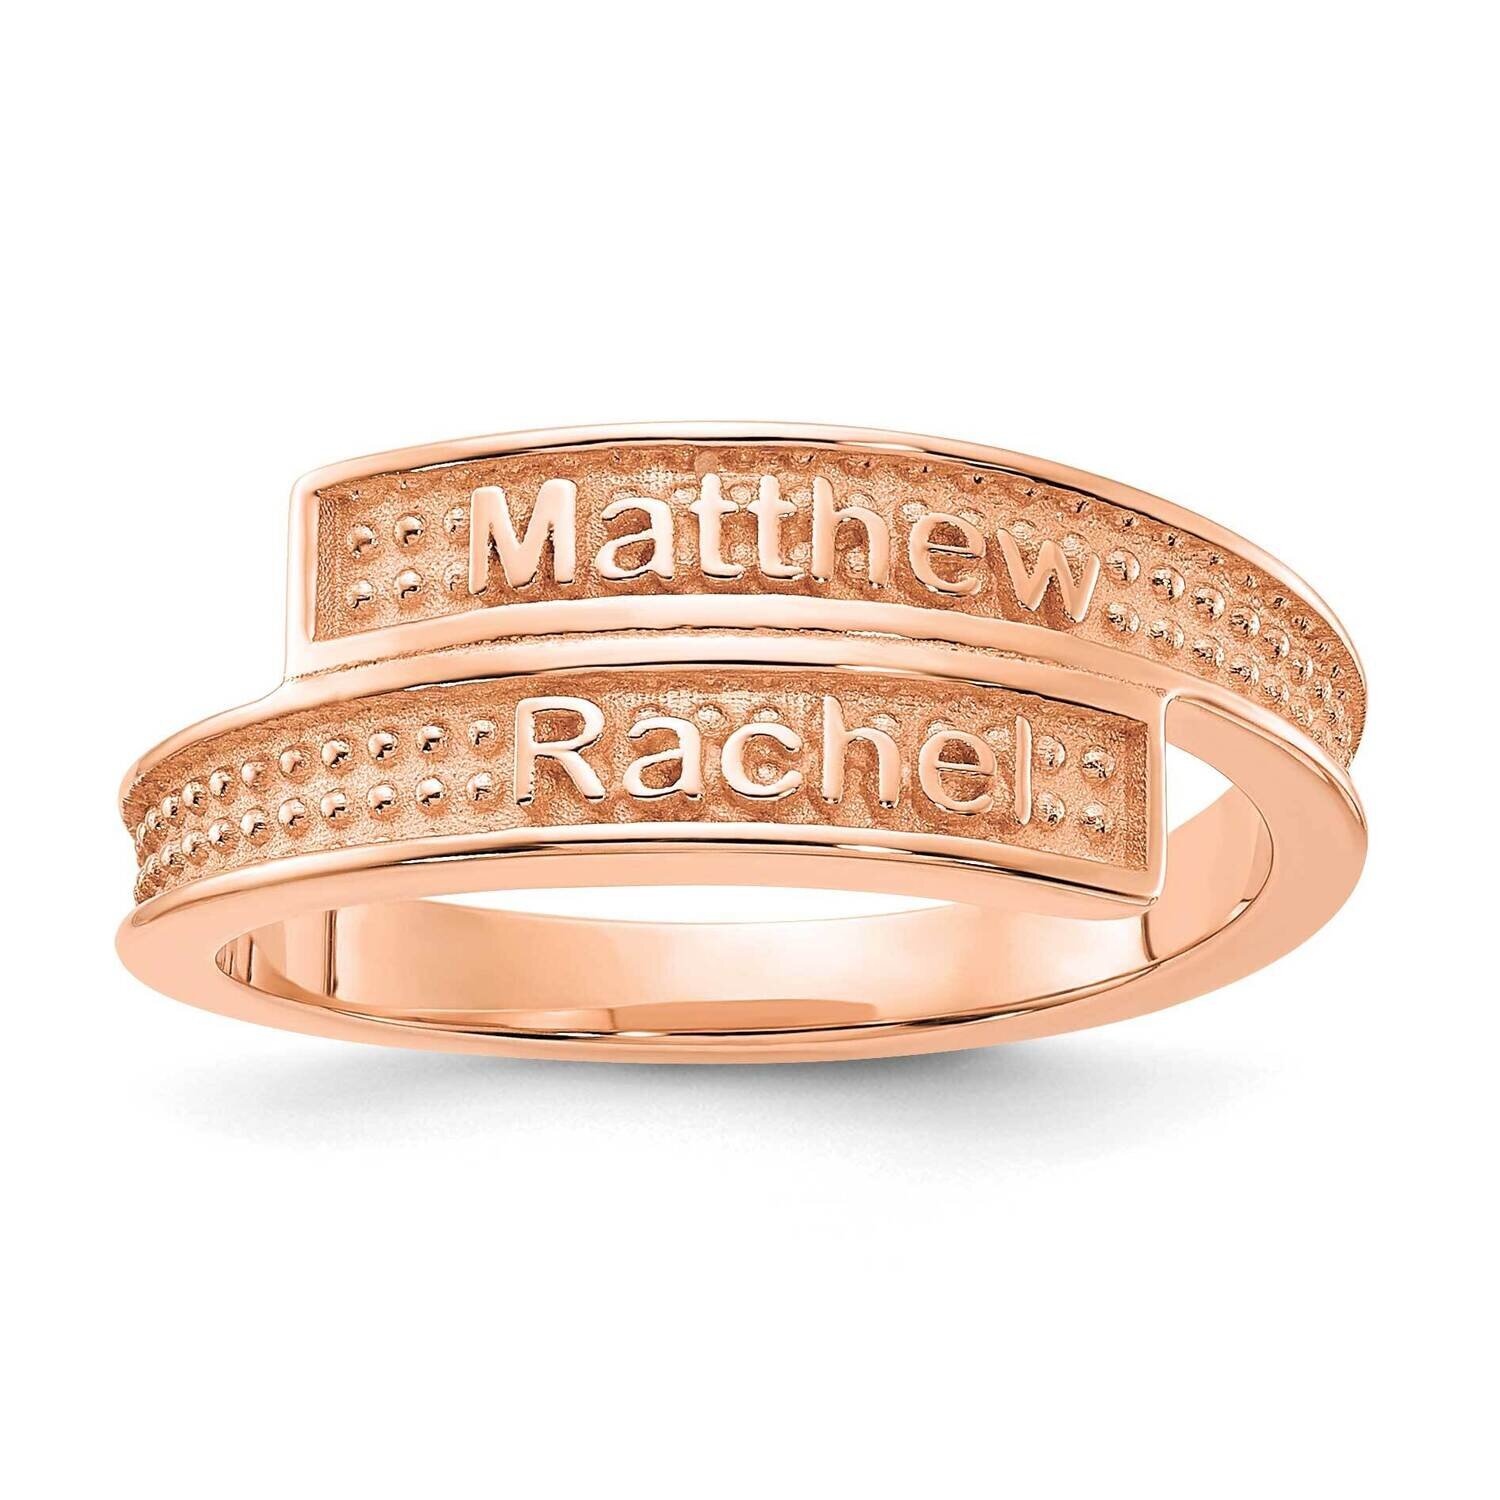 Personalized Polished and Textured Ring 14k Rose Gold XNR64R